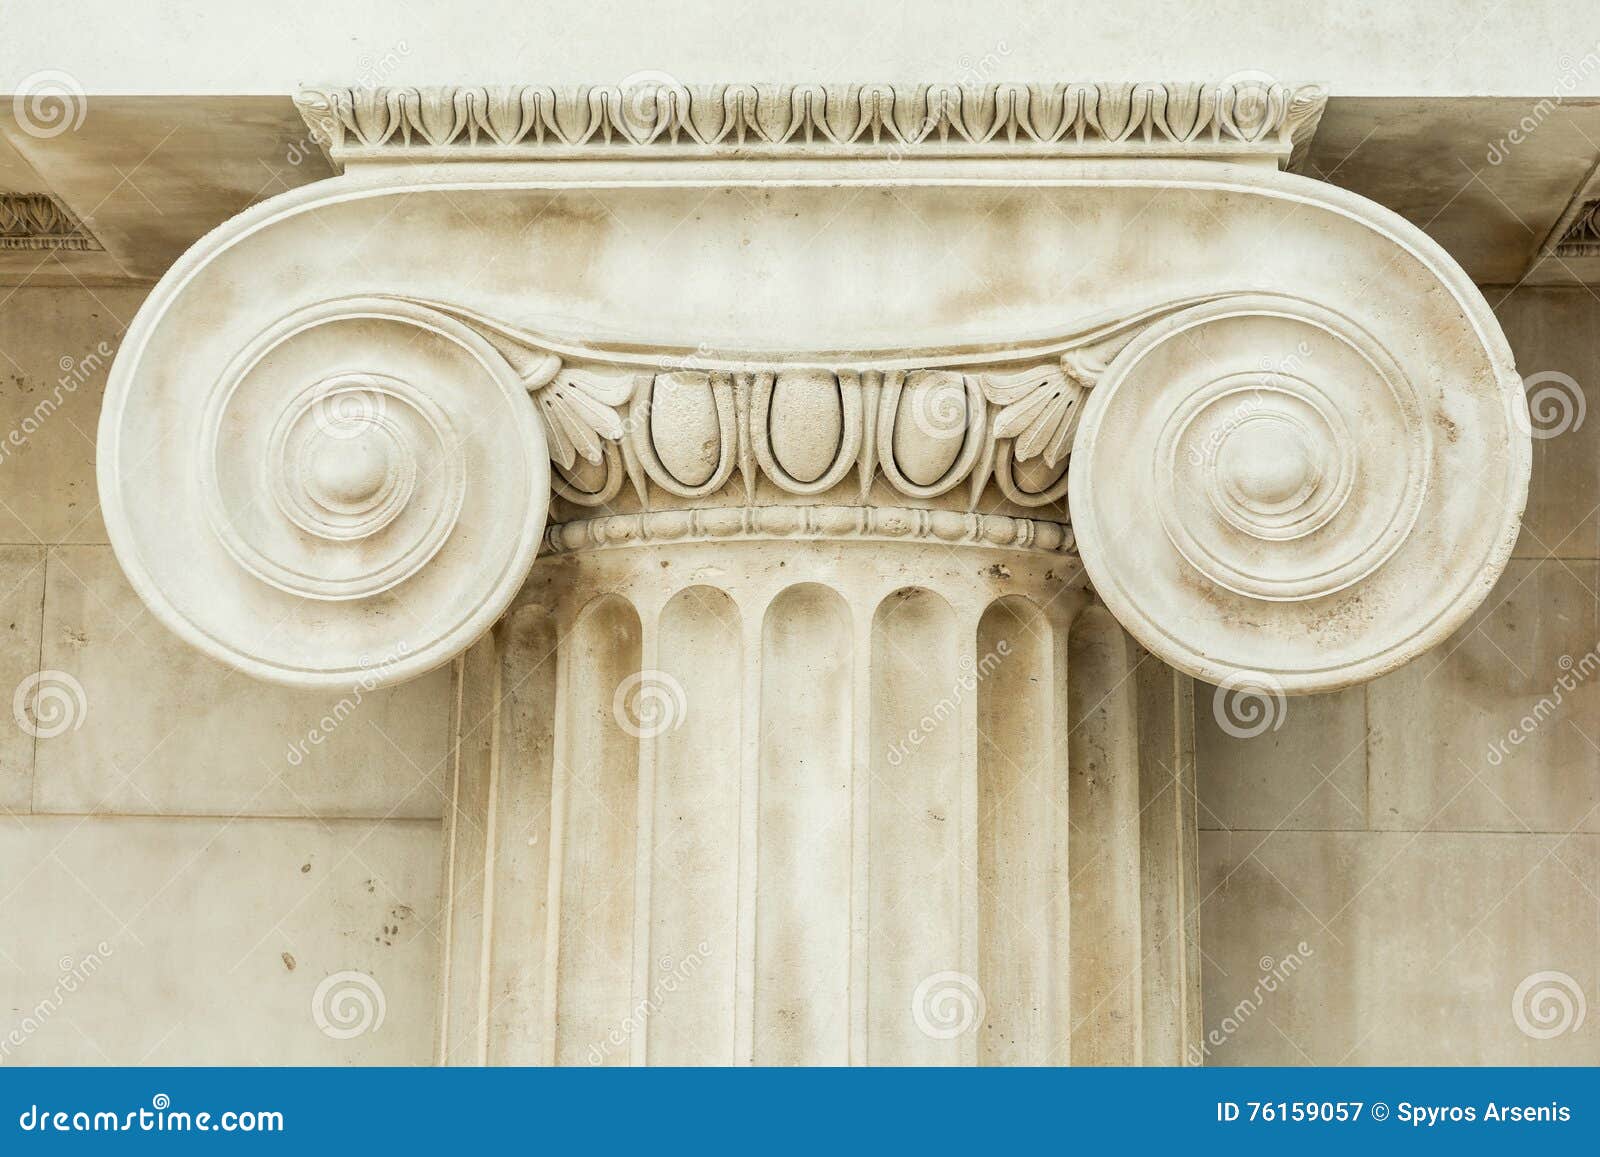 decorative detail of an ancient ionic column